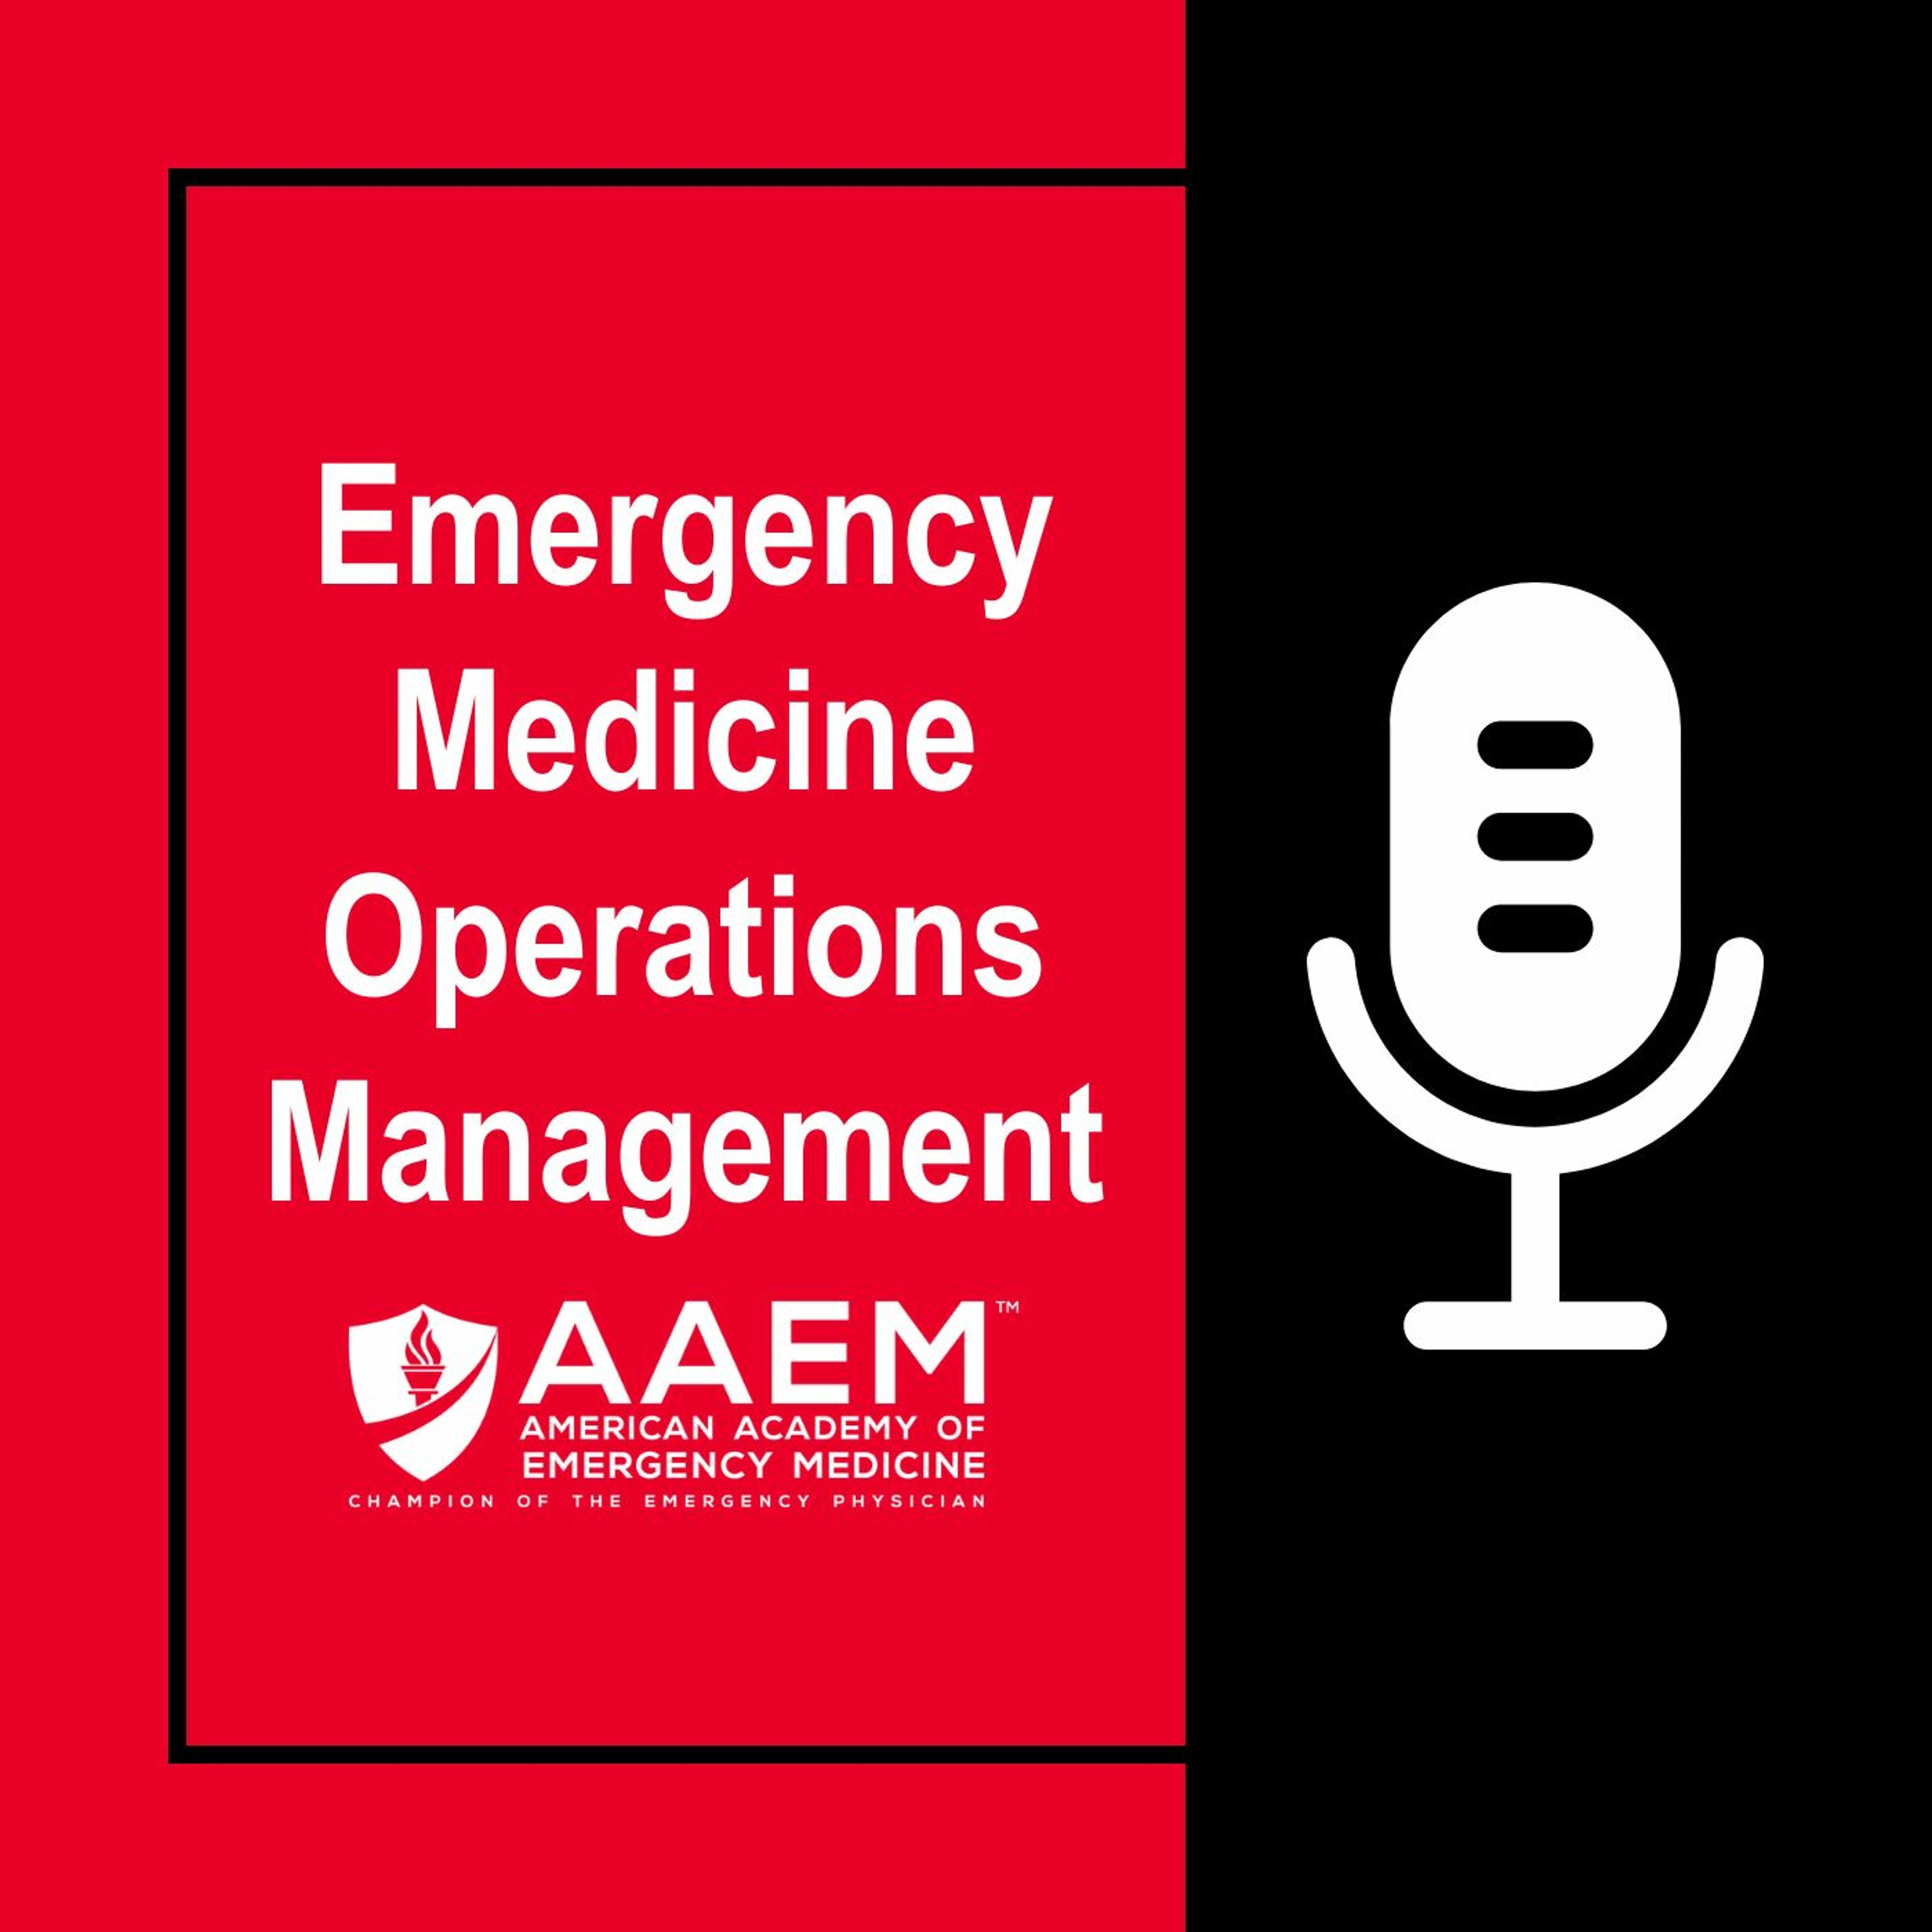 Join Us for the Operations Management Preconference Course at AAEM14!